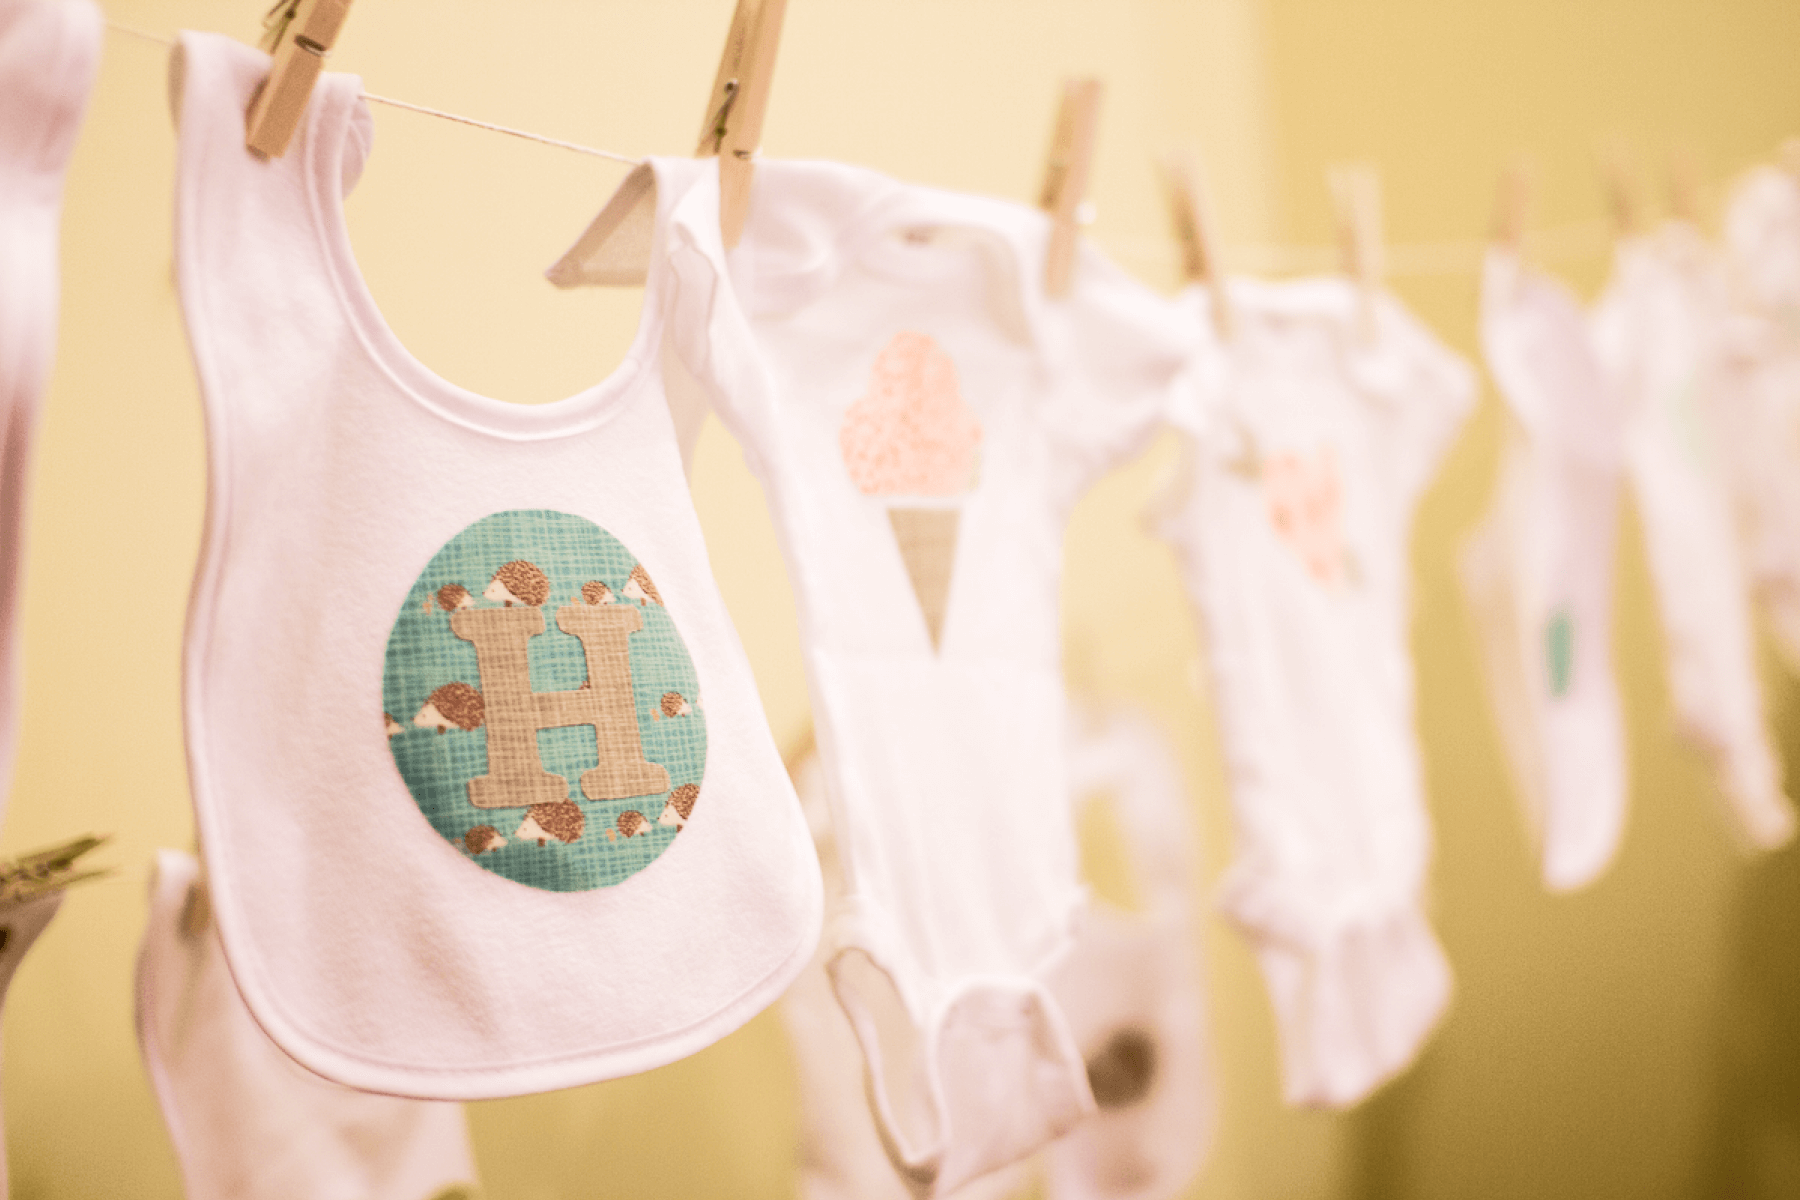 DIY onesies hanging from clothespins